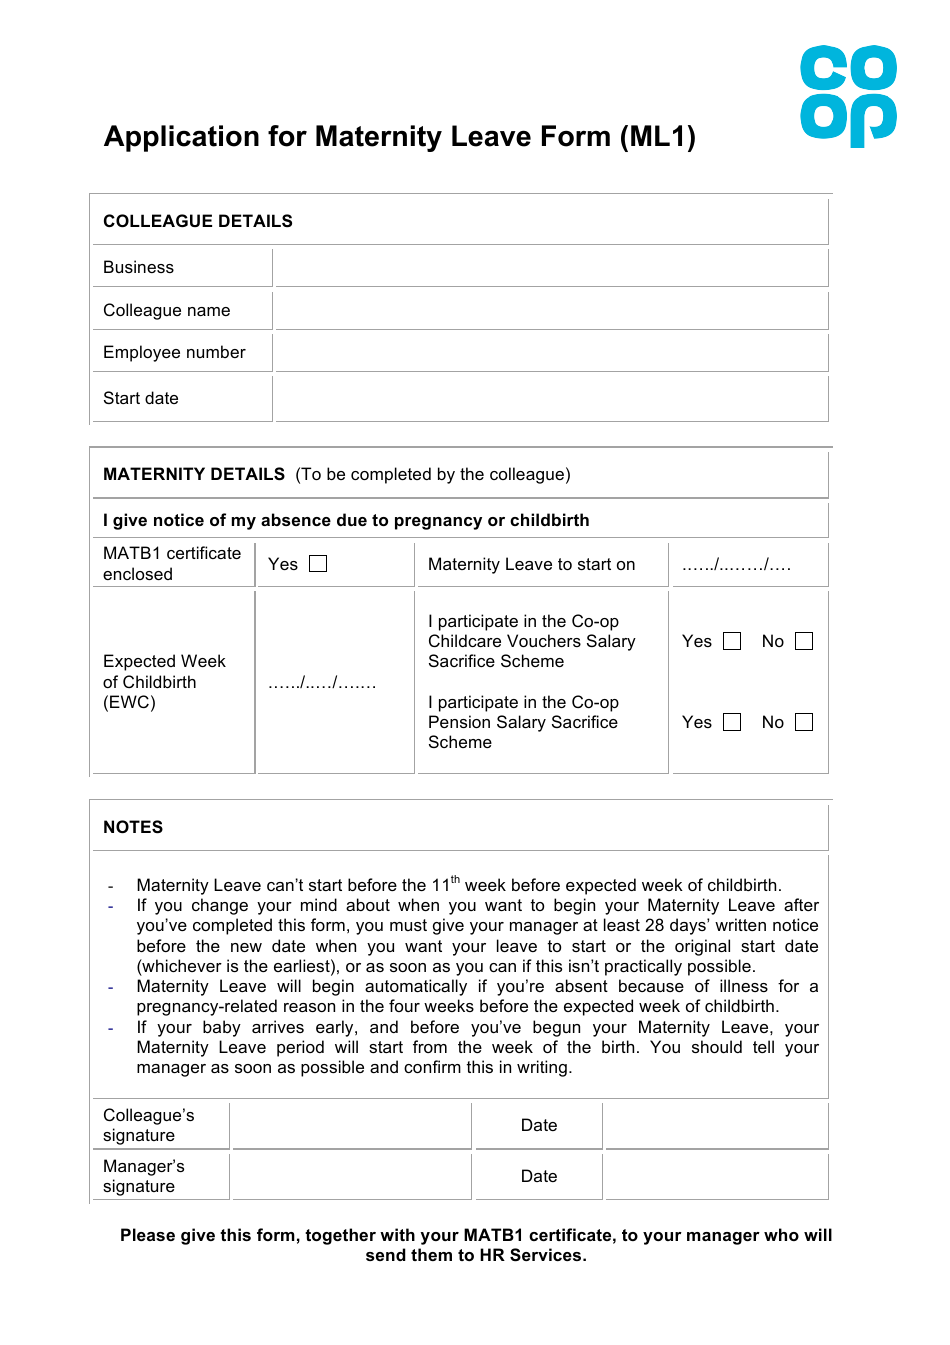 Application for Maternity Leave Form Coop Fill Out, Sign Online